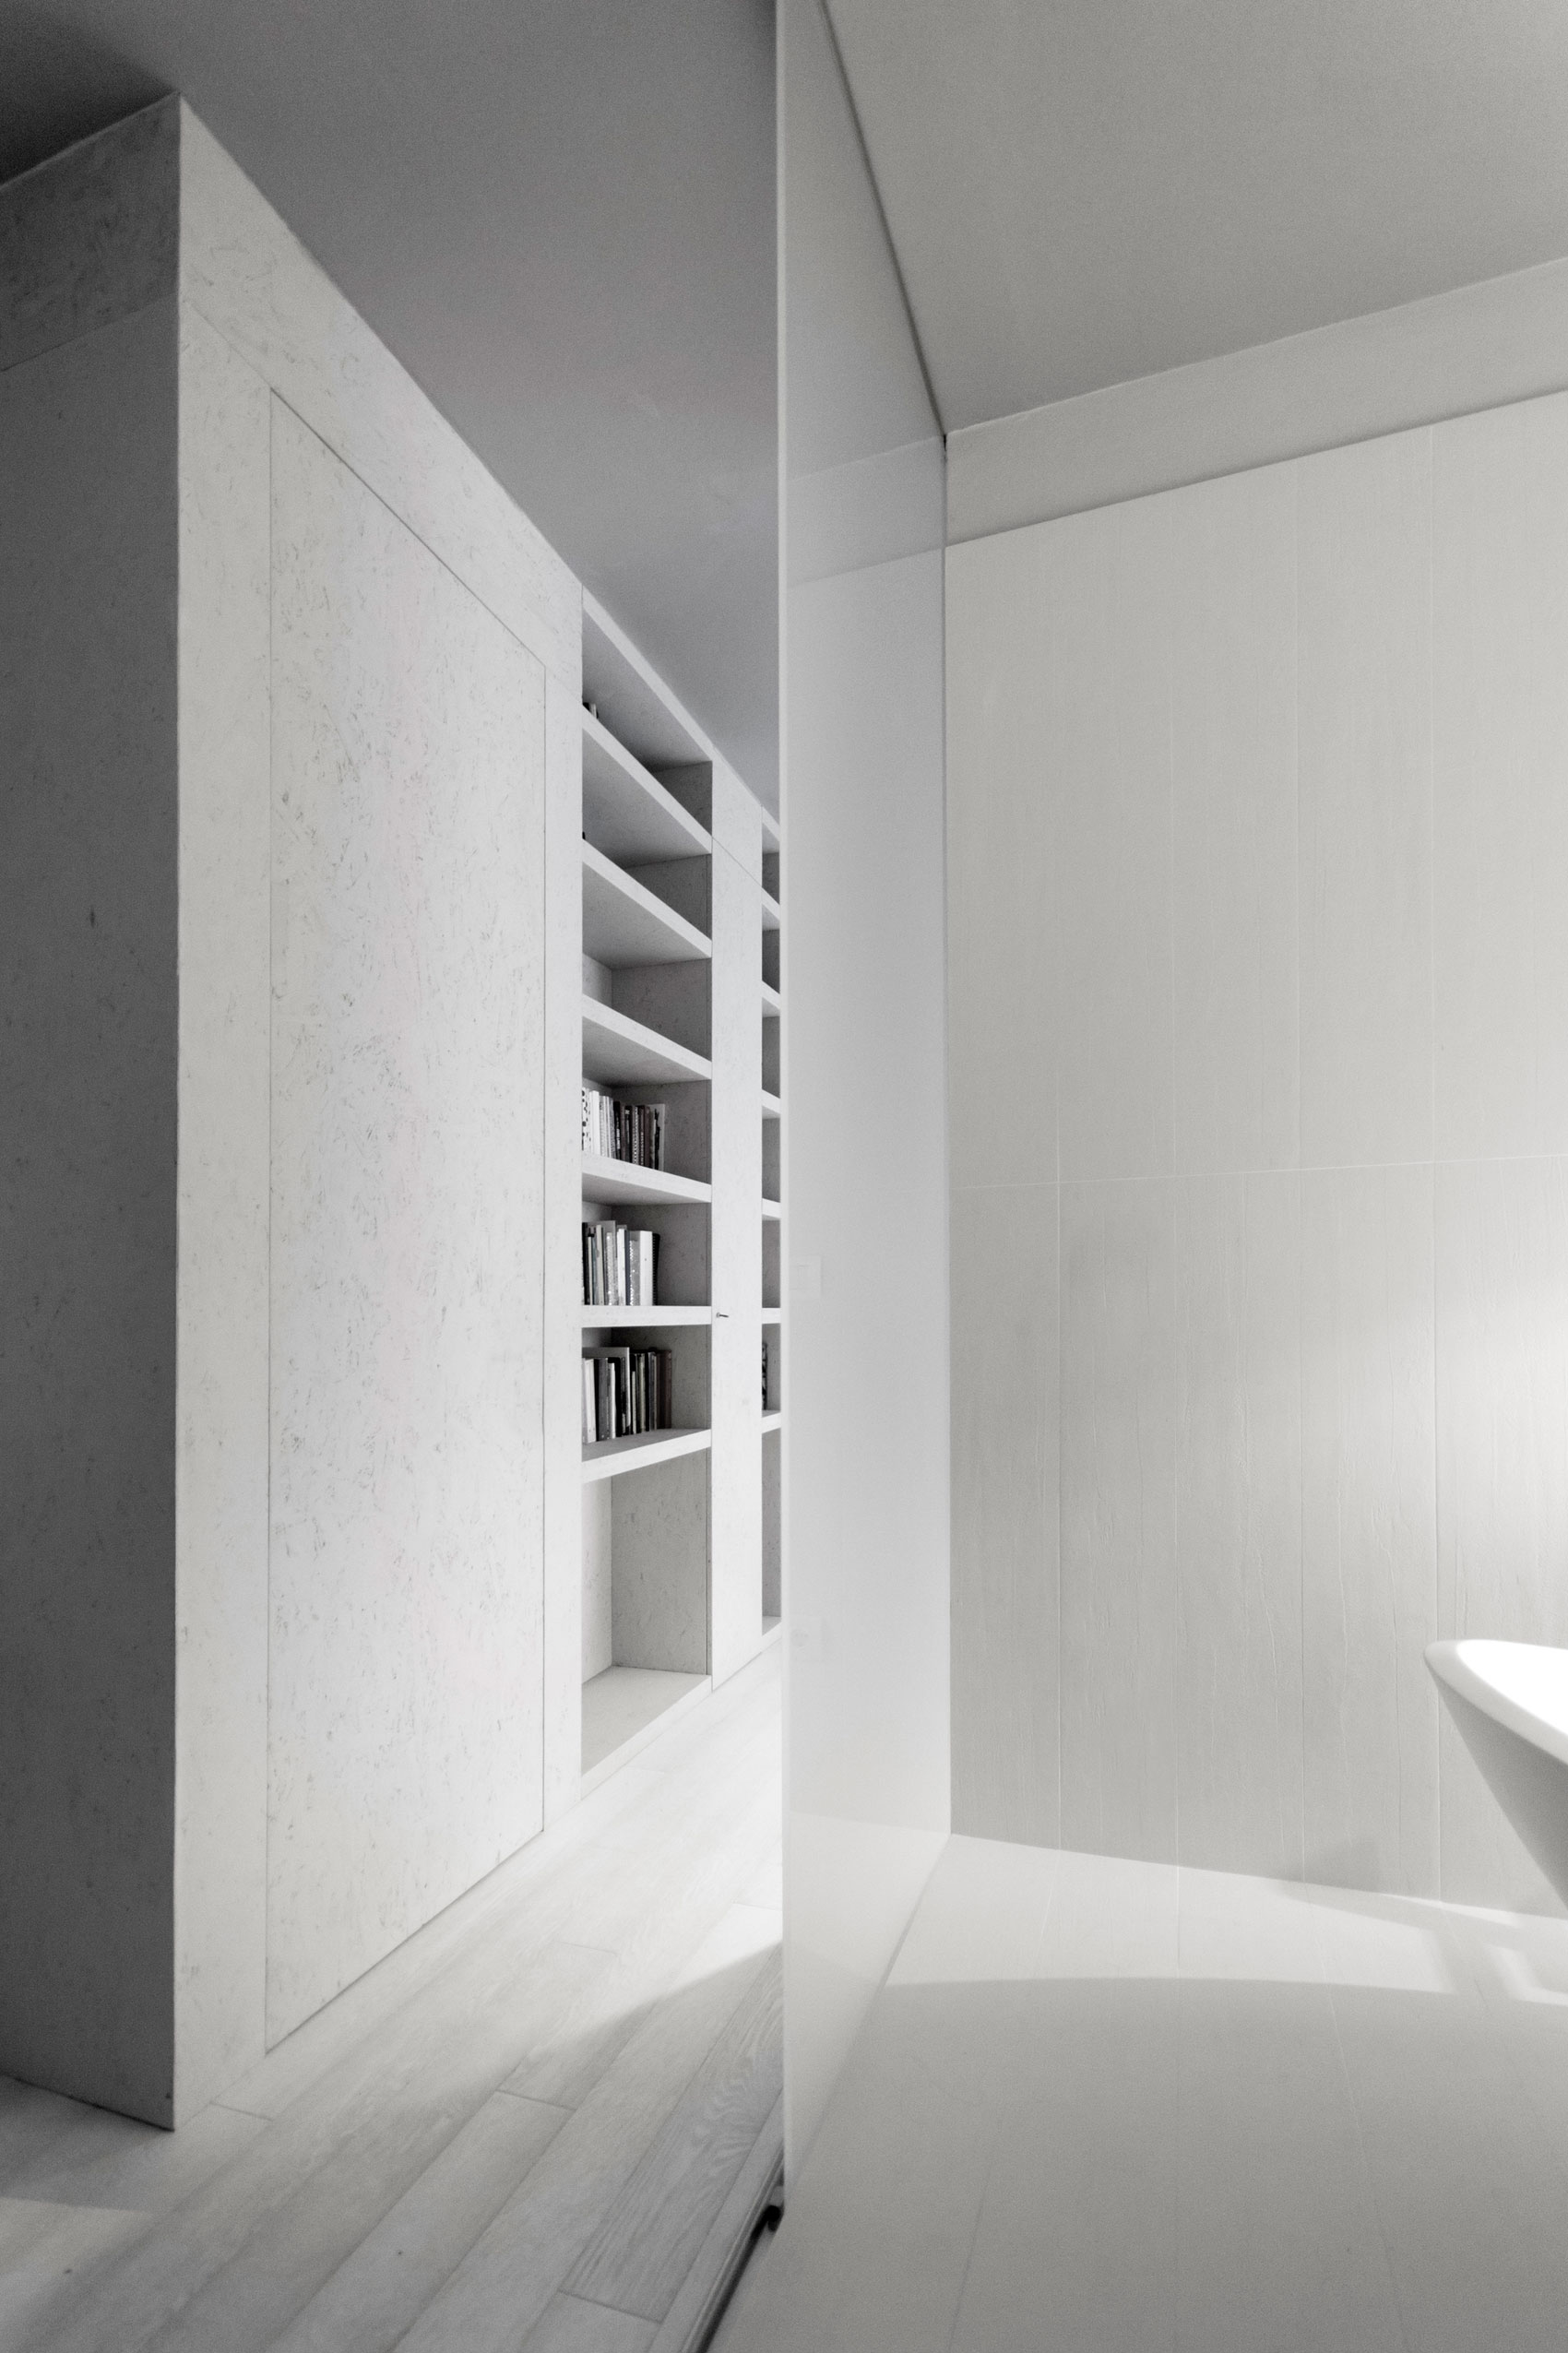 A Small Contemporary Home in White in San Miniato, Italy by LDA.iMdA Associated Architects (14)